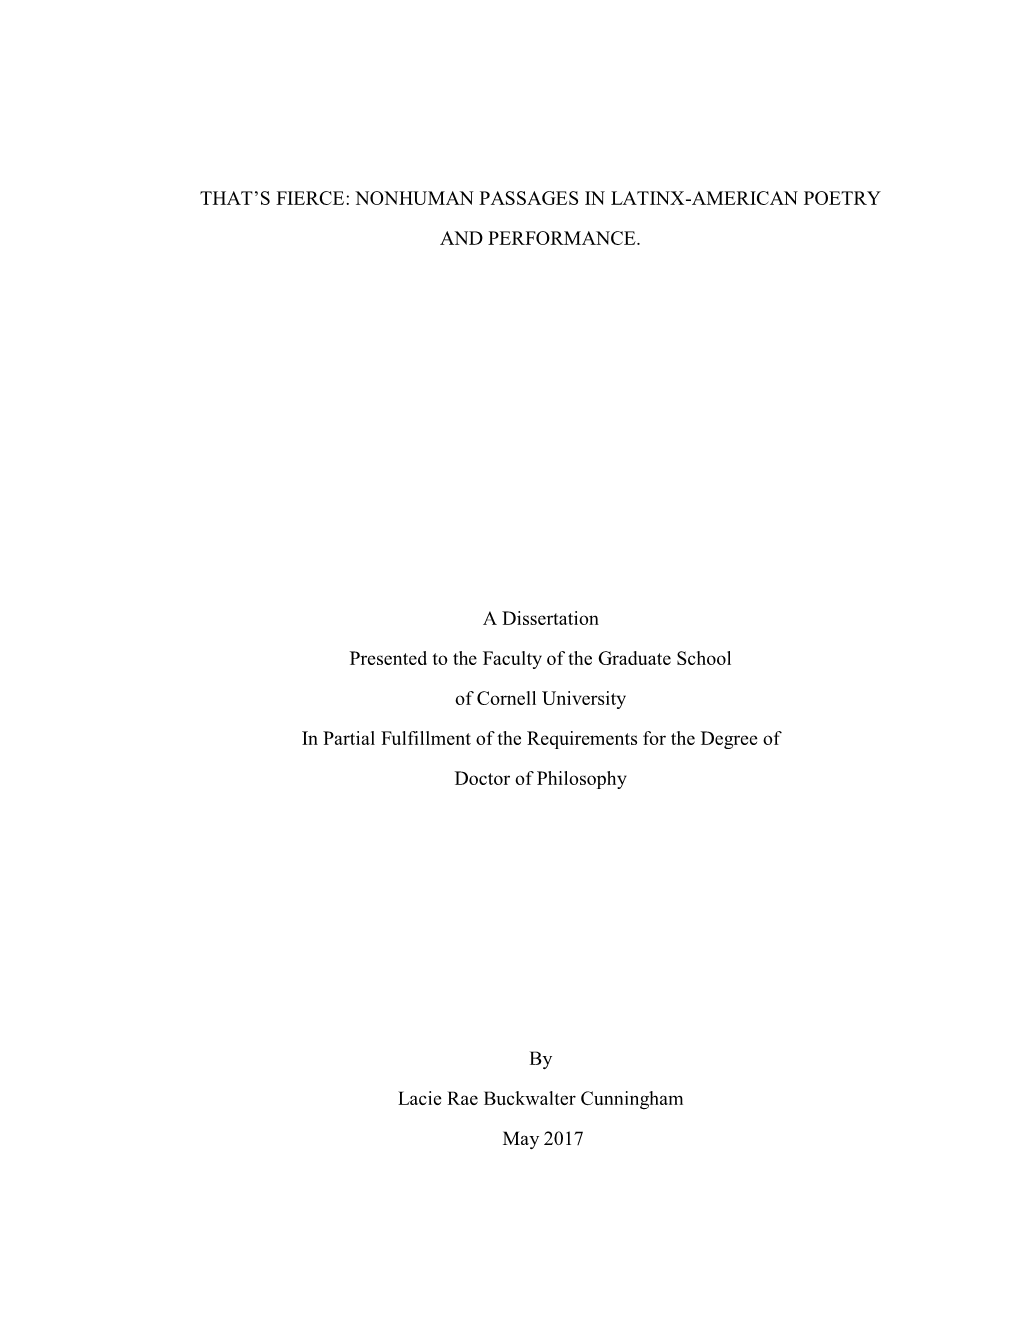 THAT's FIERCE: NONHUMAN PASSAGES in LATINX-AMERICAN POETRY and PERFORMANCE. a Dissertation Presented to the Faculty of The